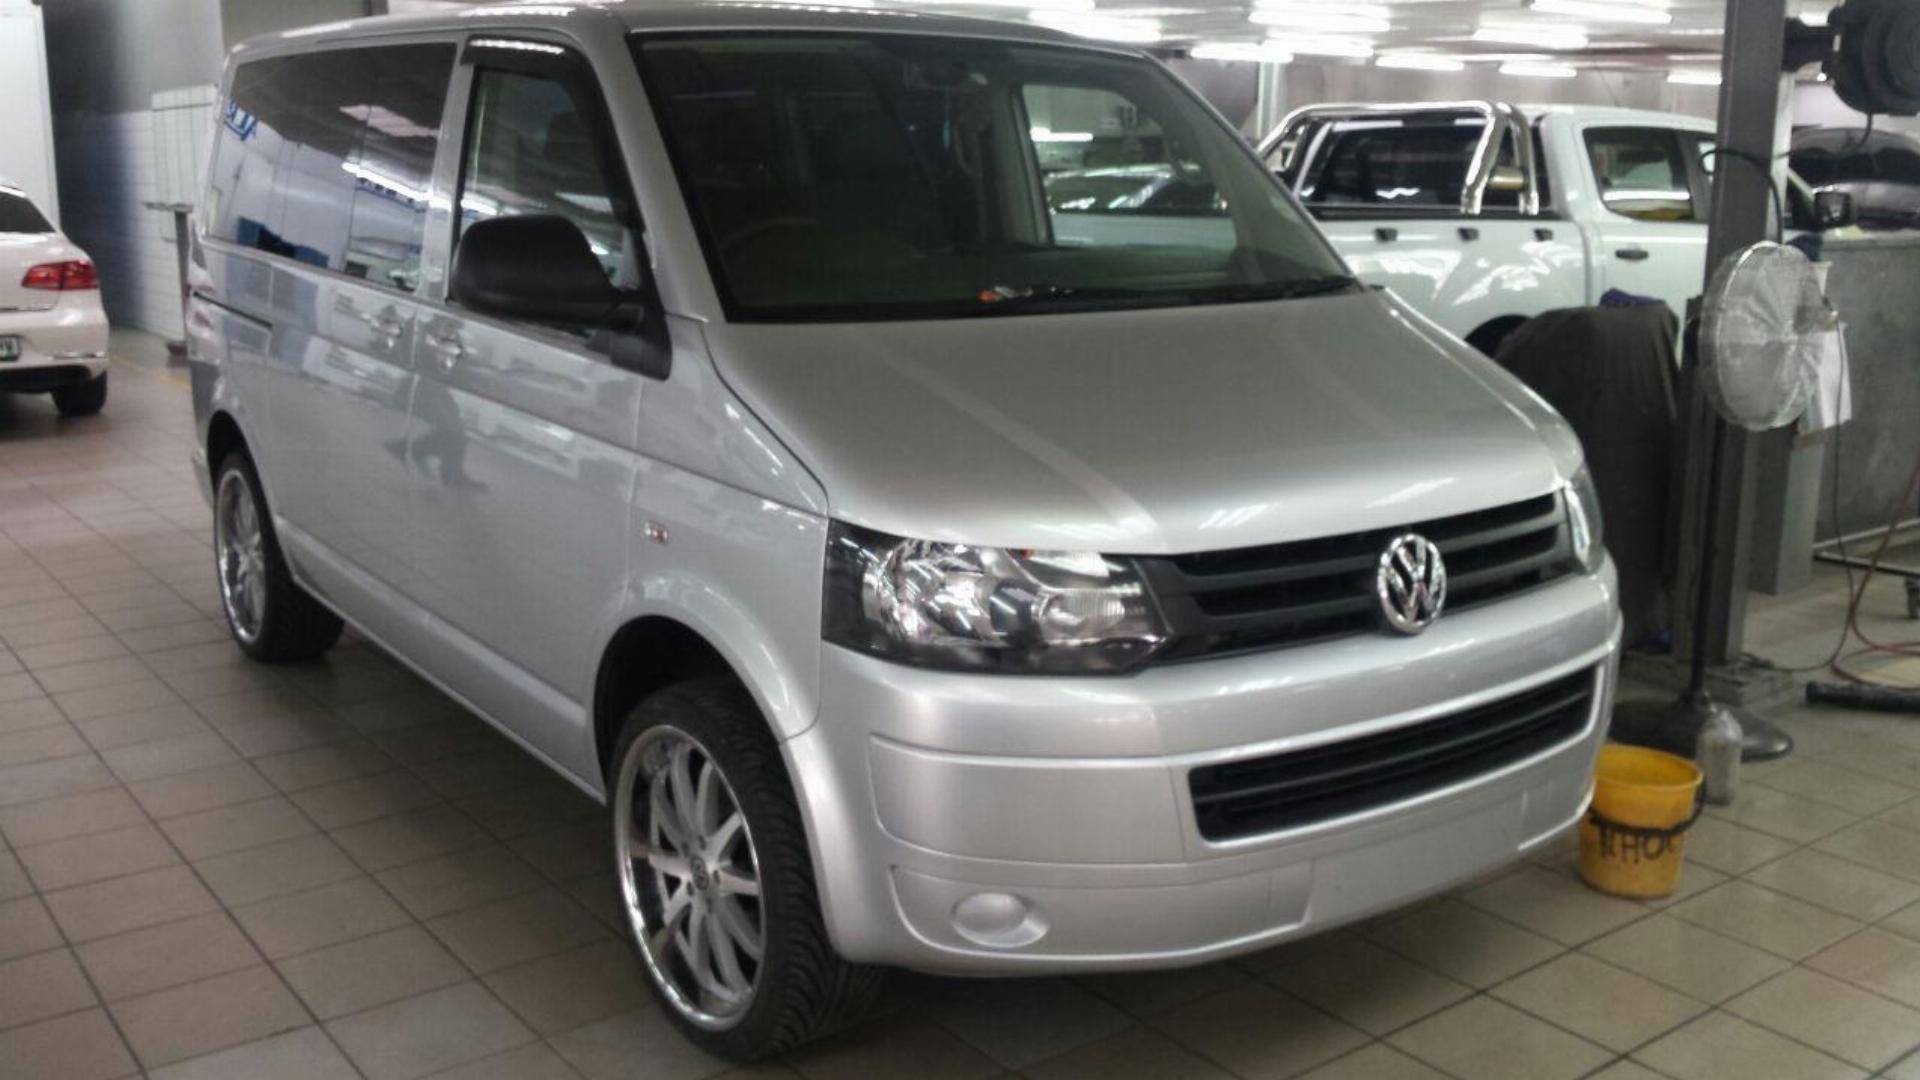 Used VW Caravelle T5 2.0 Tdi 2013 on auction PV1008740